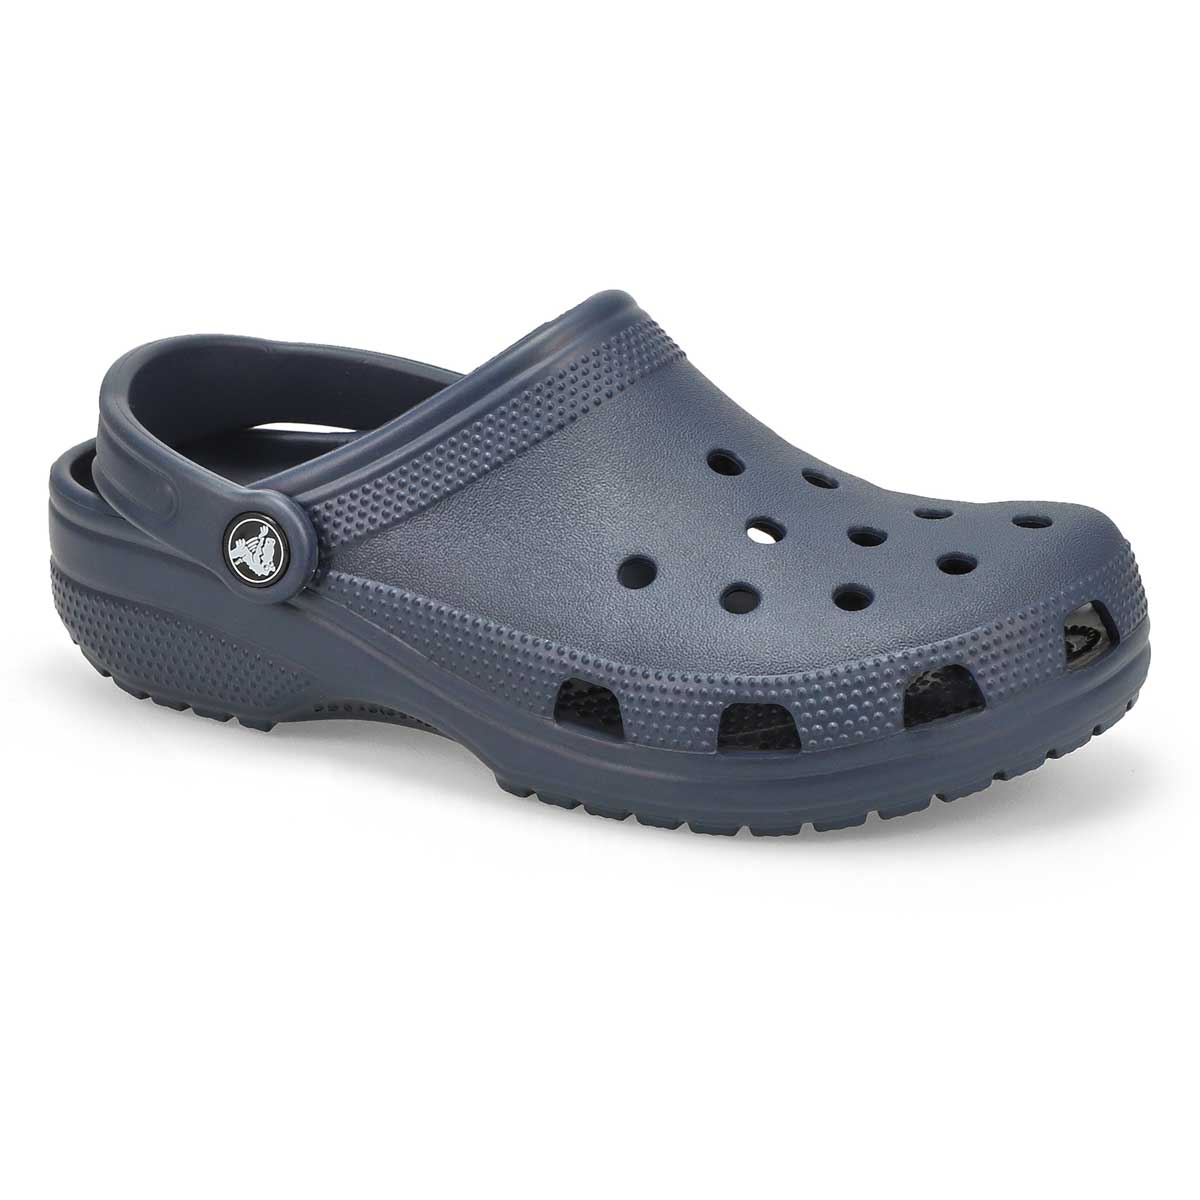 Does Shoe Show Sell Crocs Deals, SAVE 